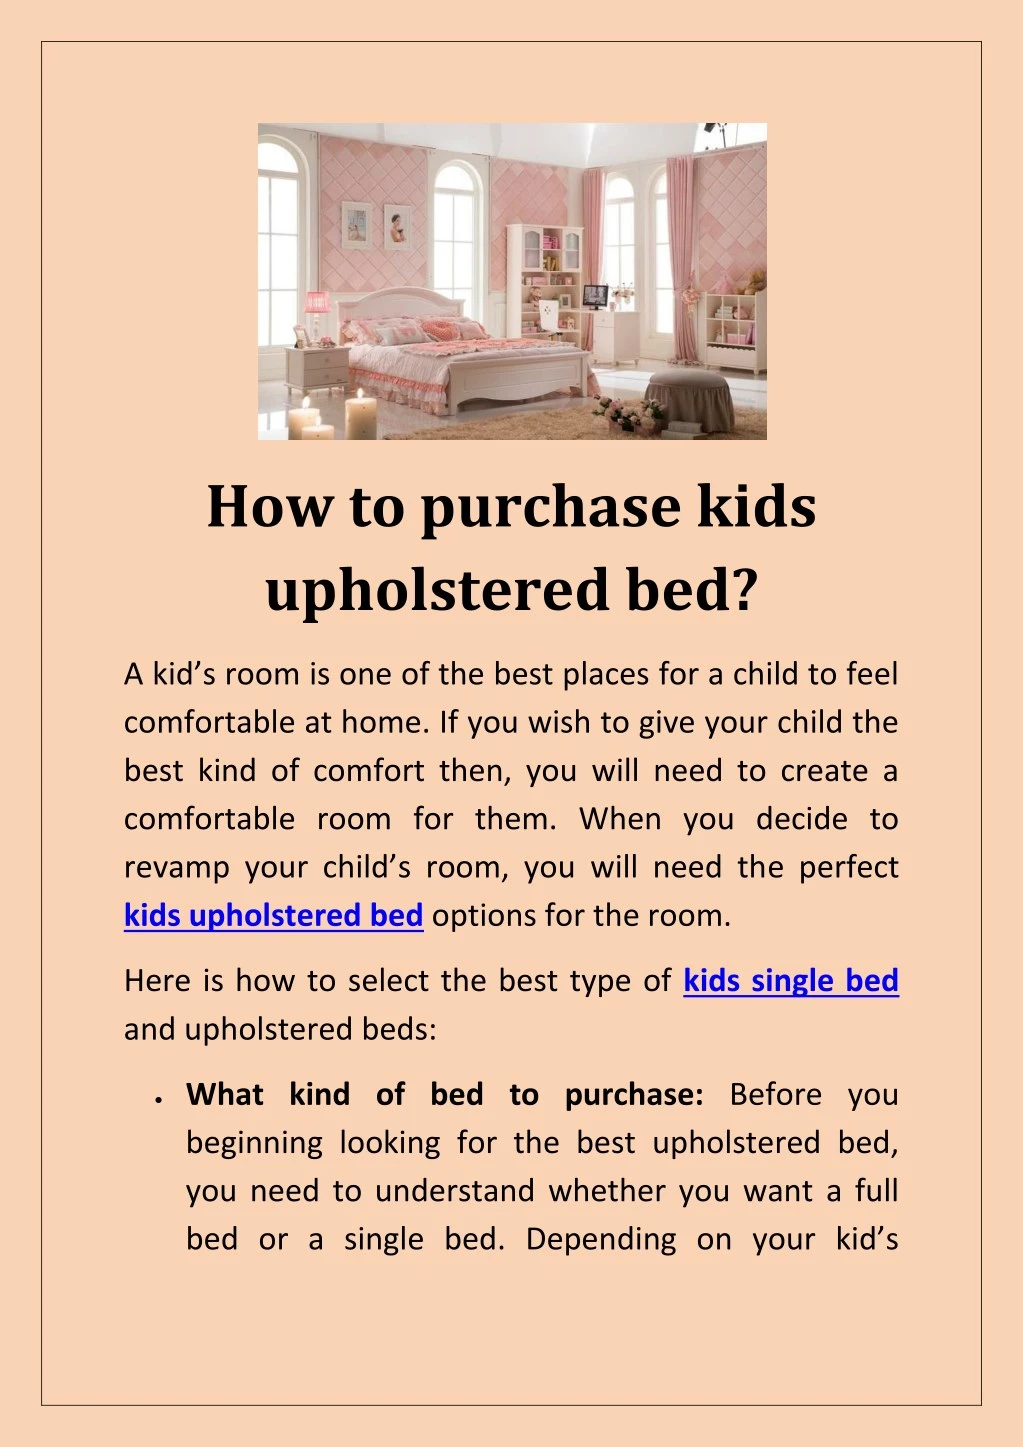 how to purchase kids upholstered bed